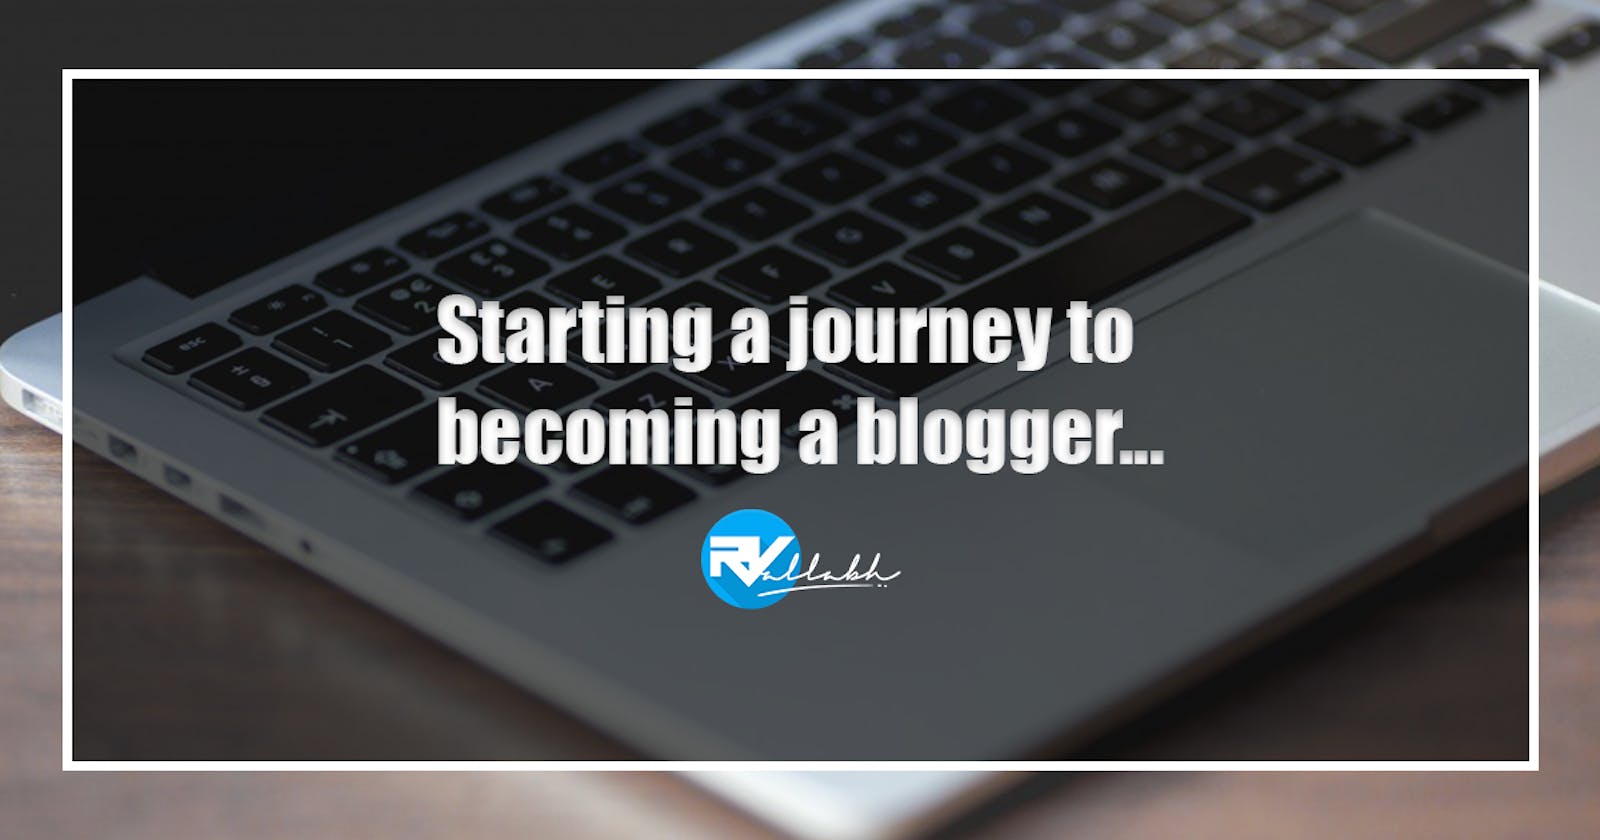 Starting a journey to becoming a blogger...